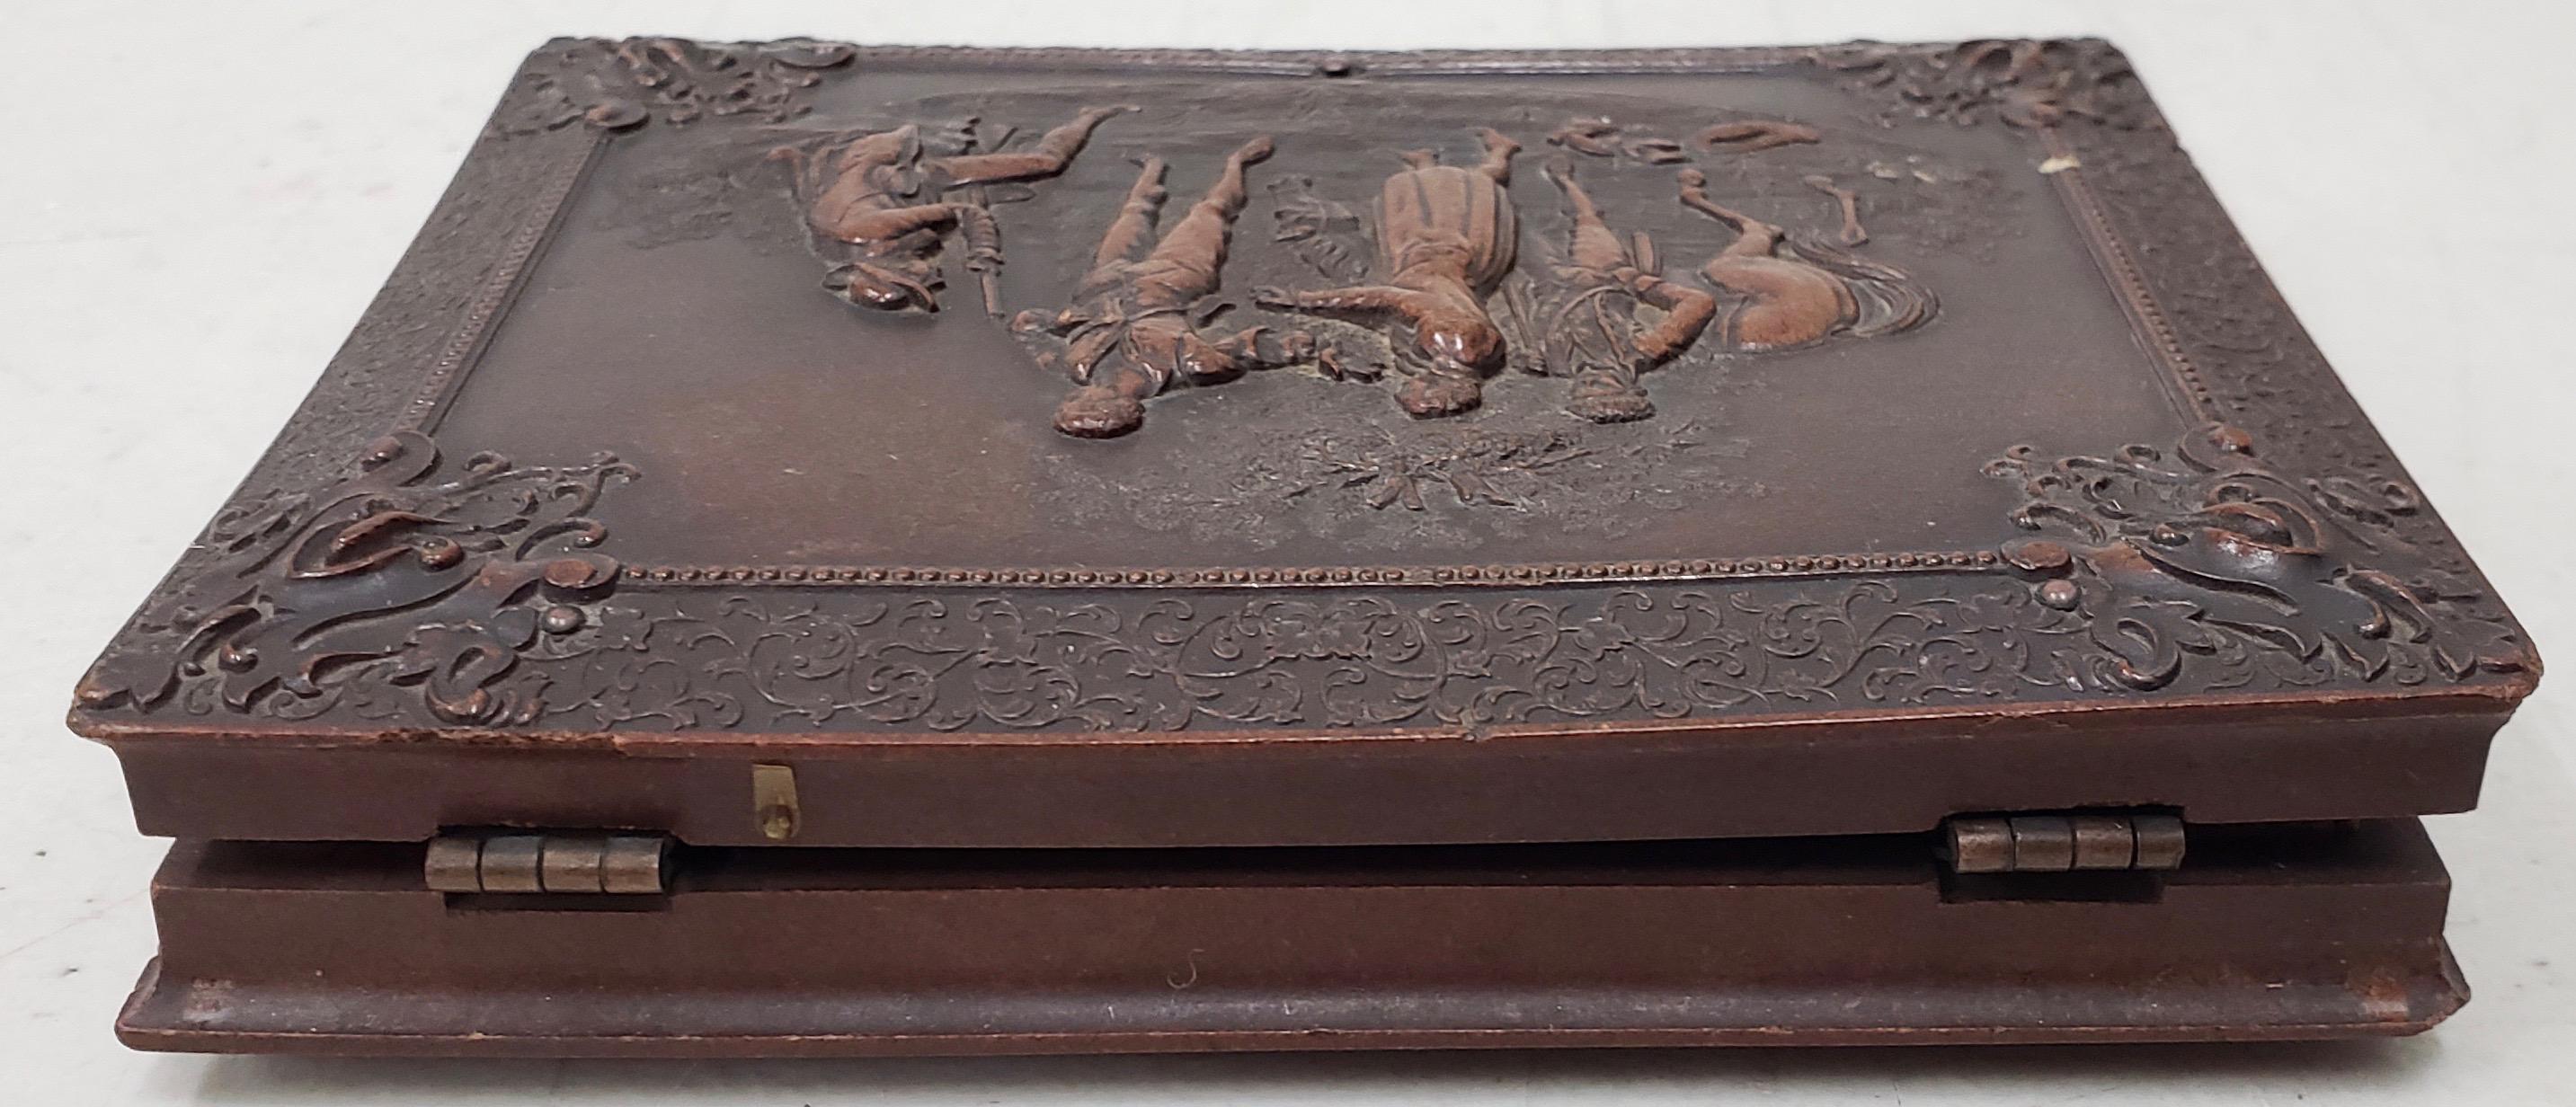 American Mid-19th Century Gutta Percha Box with Photo's & Contemporary Notes on Genealogy For Sale